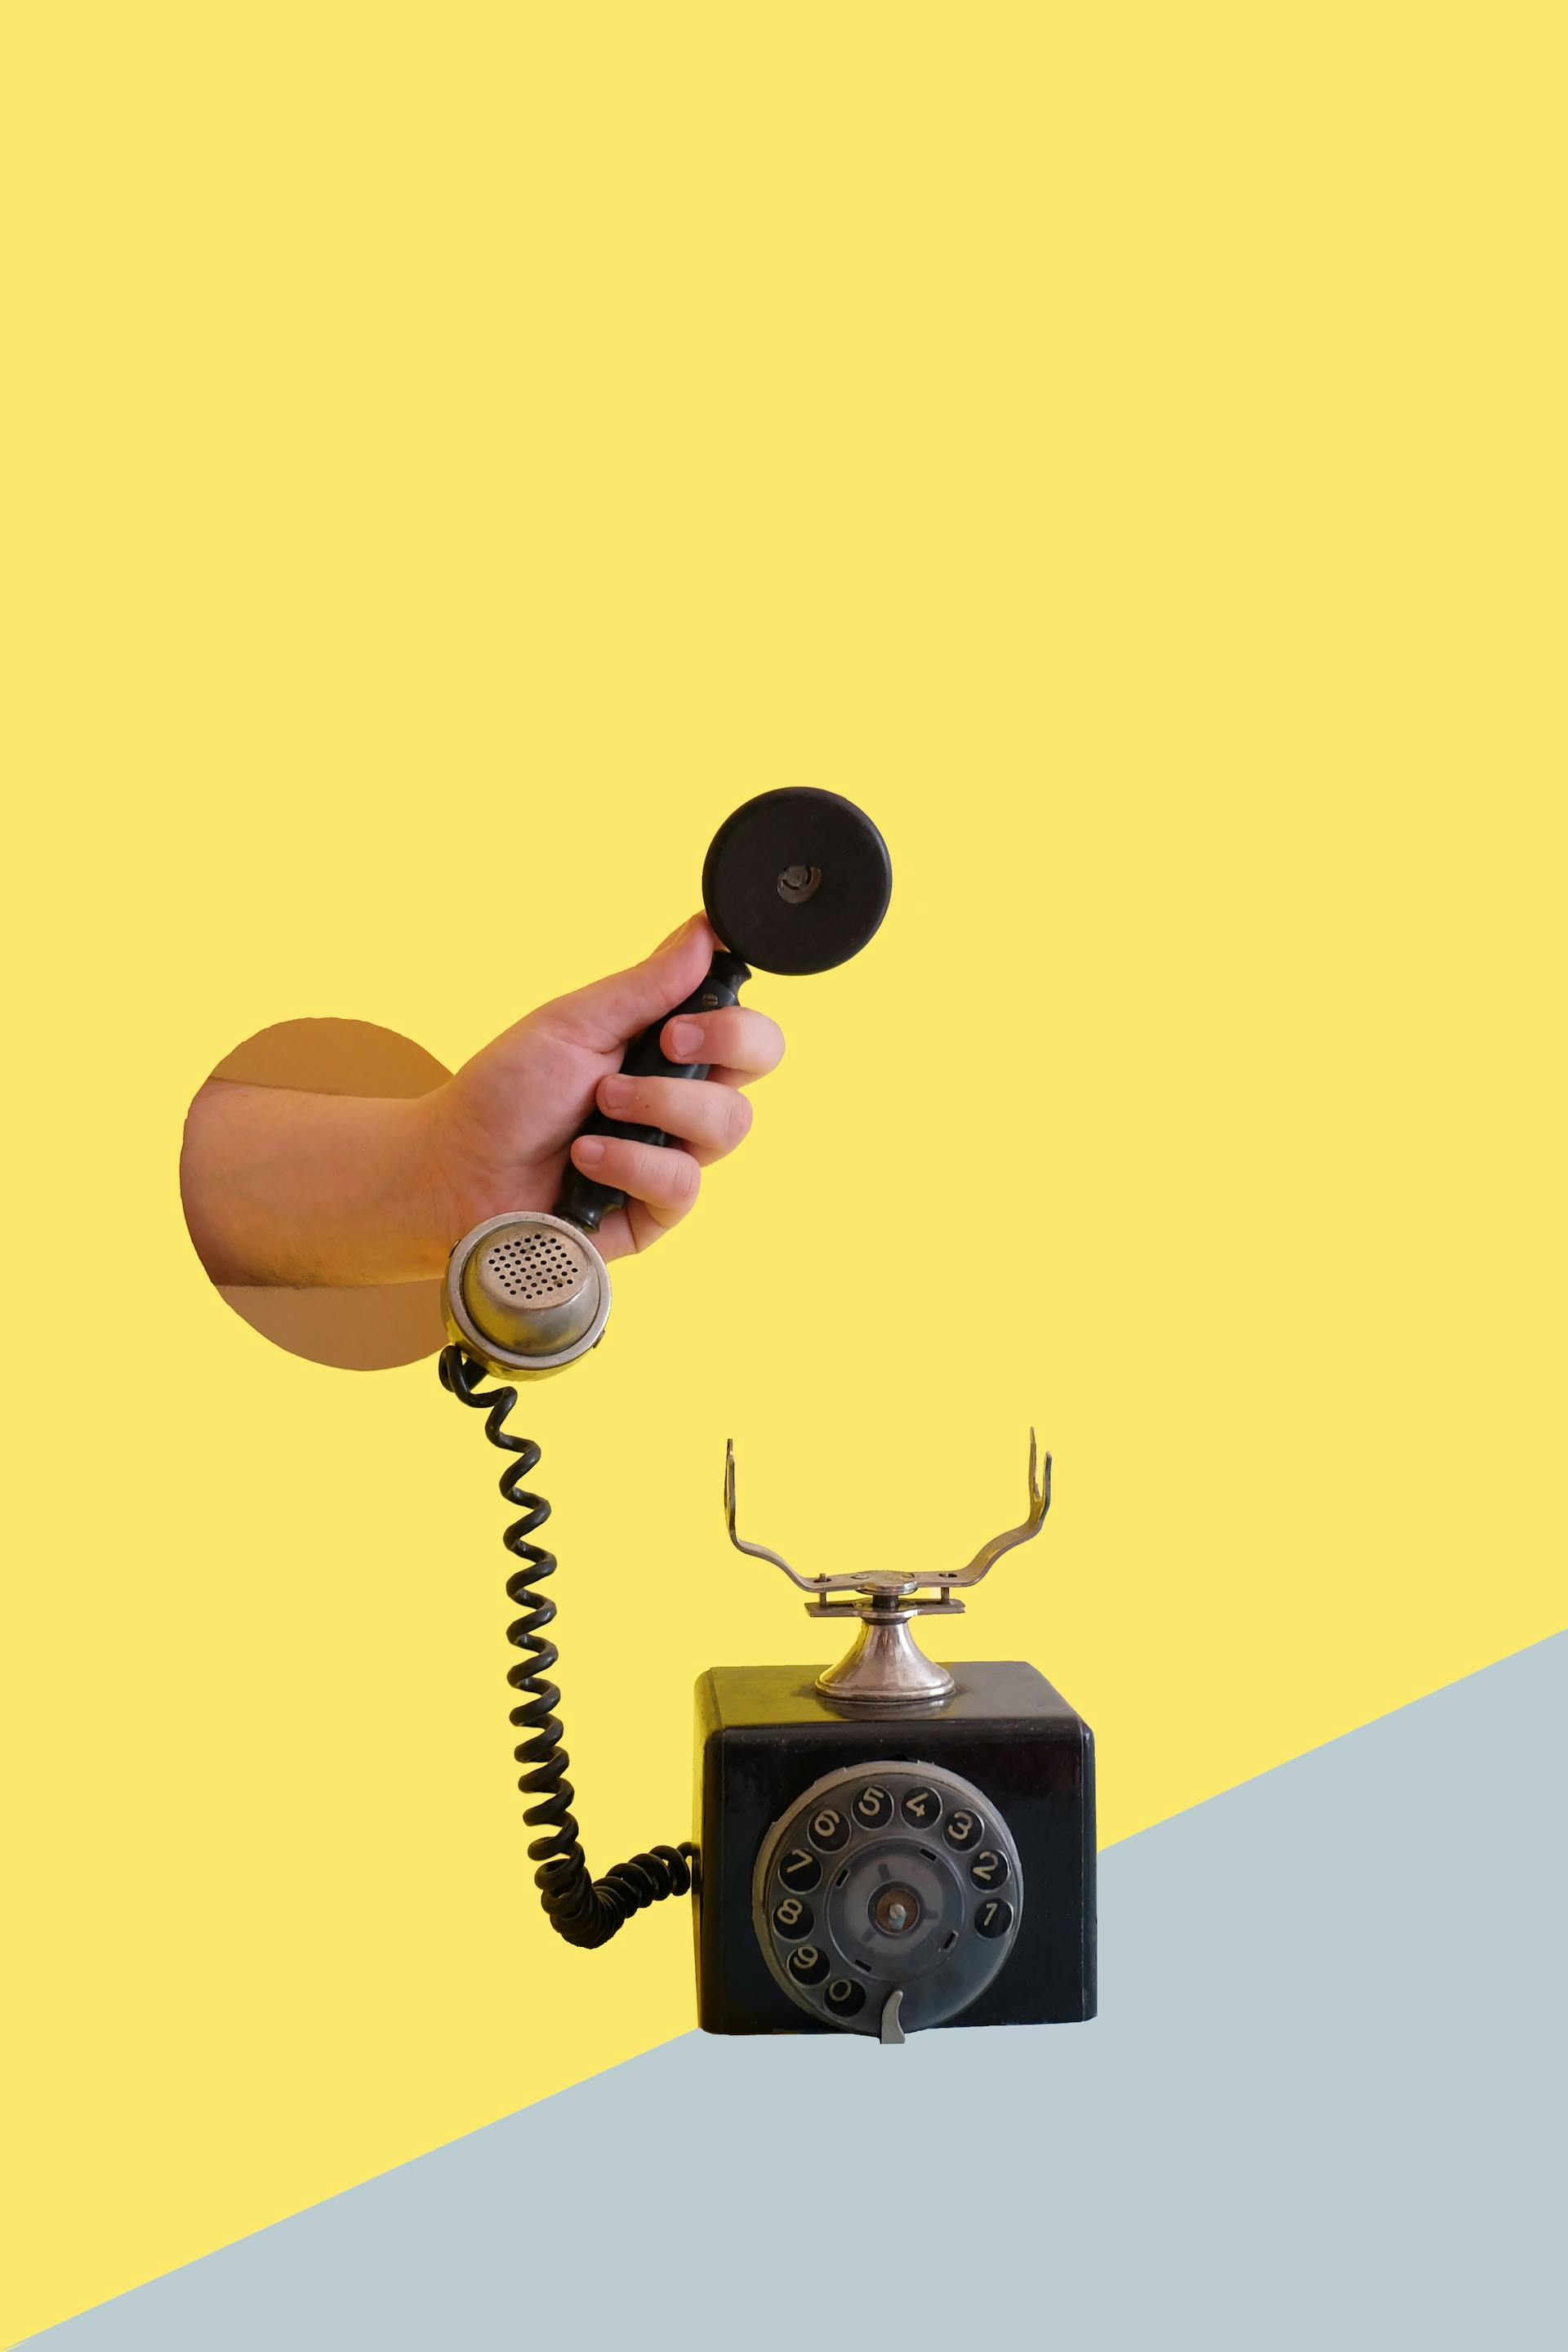 person holding black rotary telephone receiver